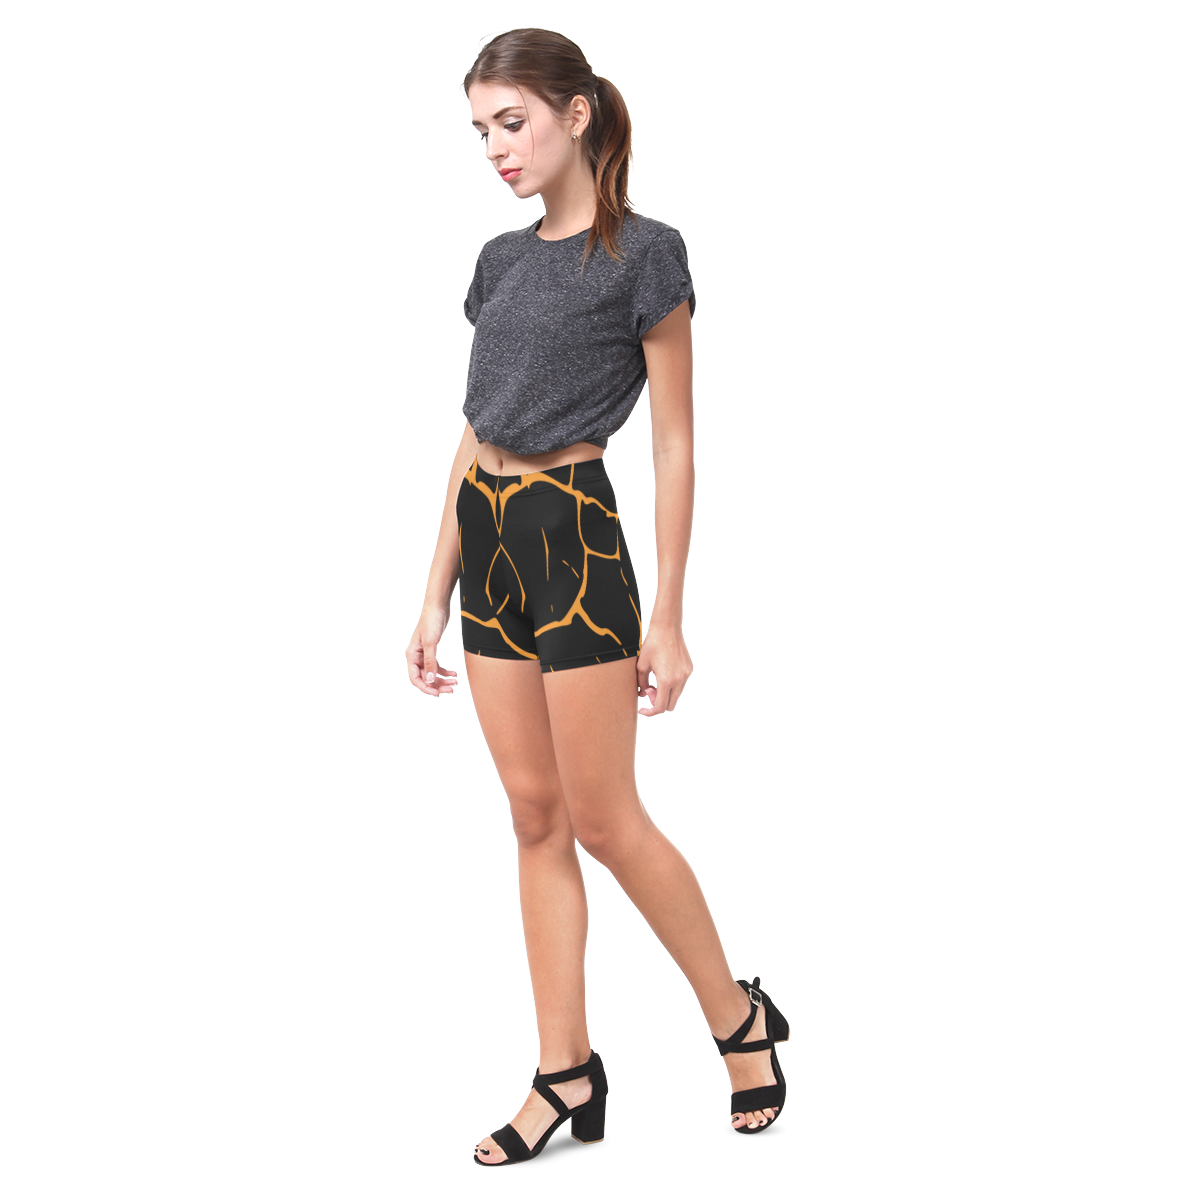 Cute Mirror designers lava - inspired fashionable Short Pants for ladies 2016 edition : Black and Or Briseis Skinny Shorts (Model L04)